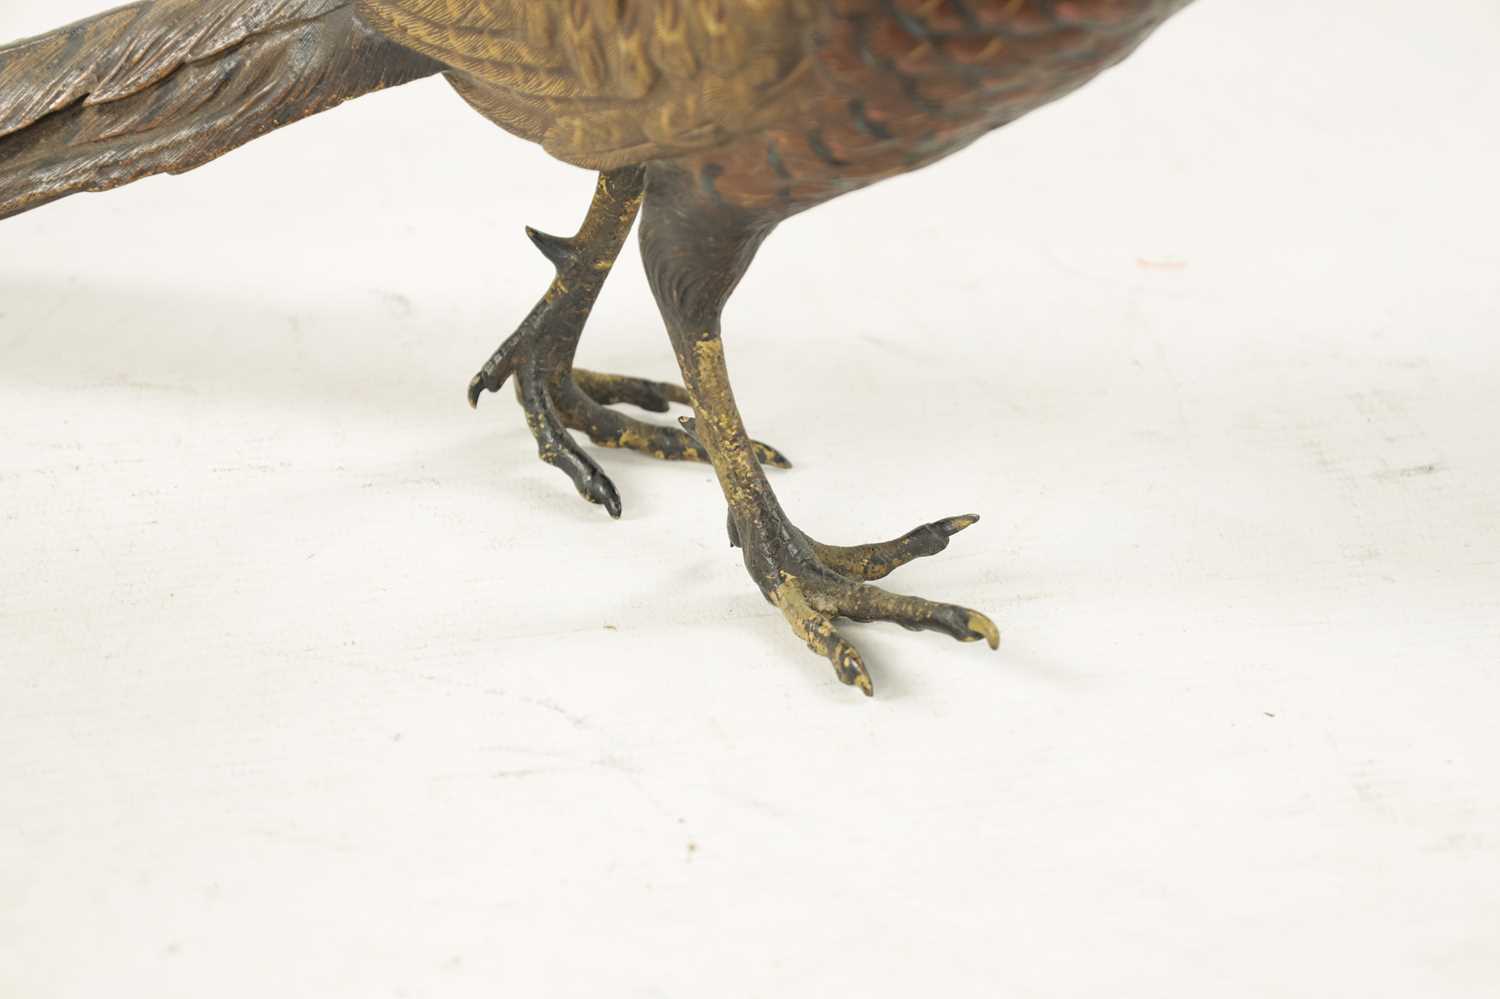 FRANZ BERGMAN. A LATE 19TH CENTURY COLD PAINTED BRONZE SCULPTURE OF A PHEASANT - Image 4 of 10